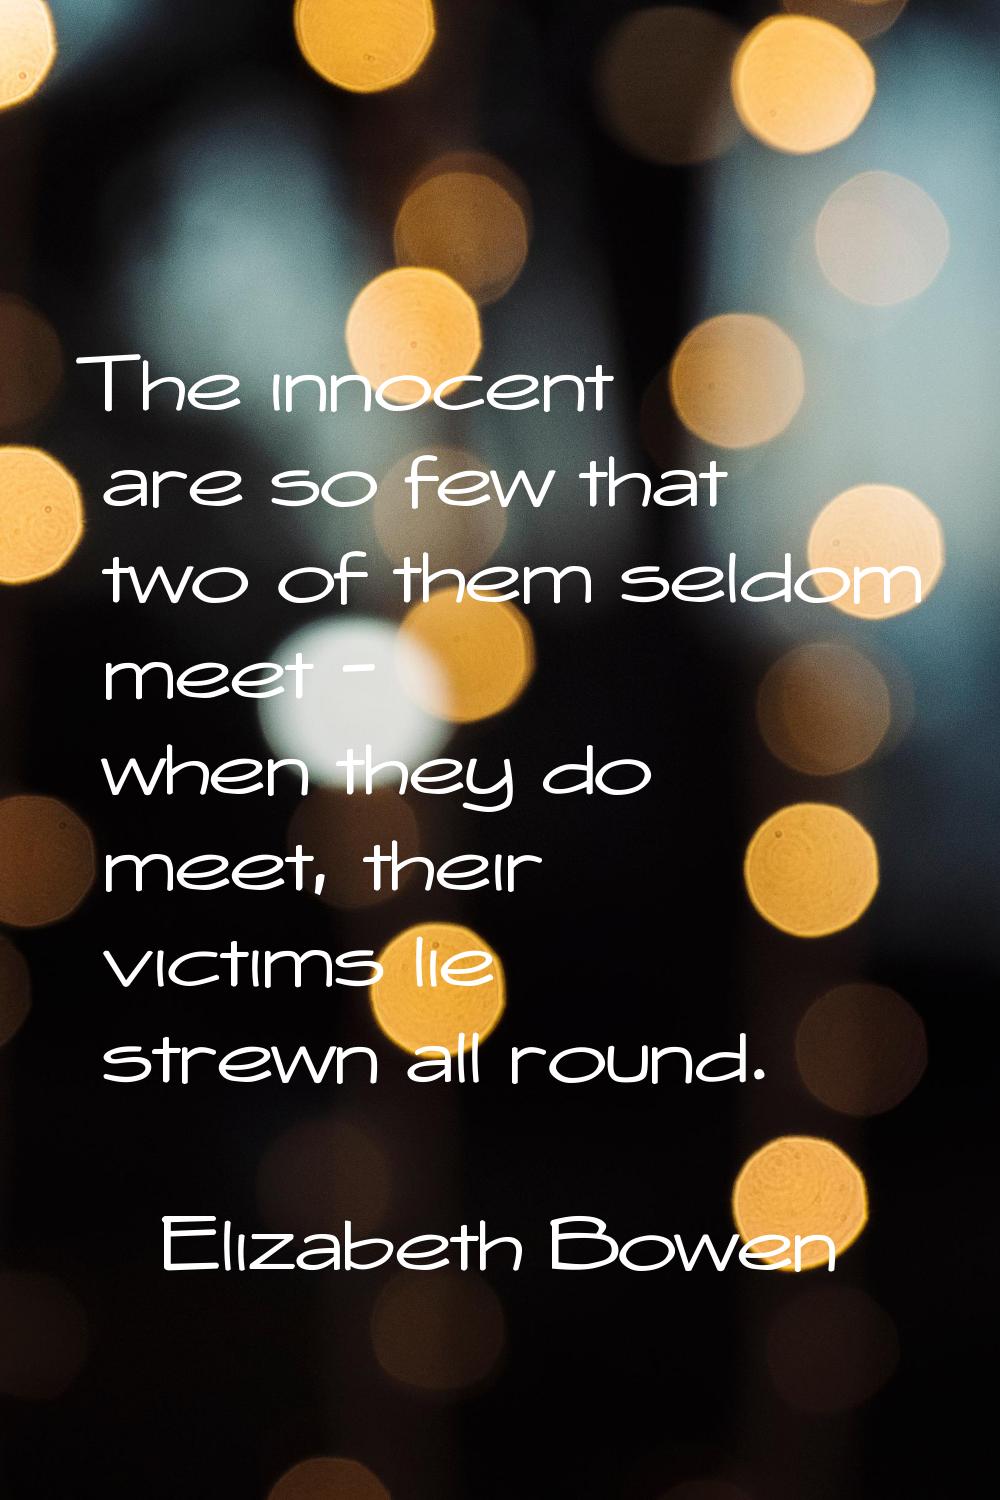 The innocent are so few that two of them seldom meet - when they do meet, their victims lie strewn 